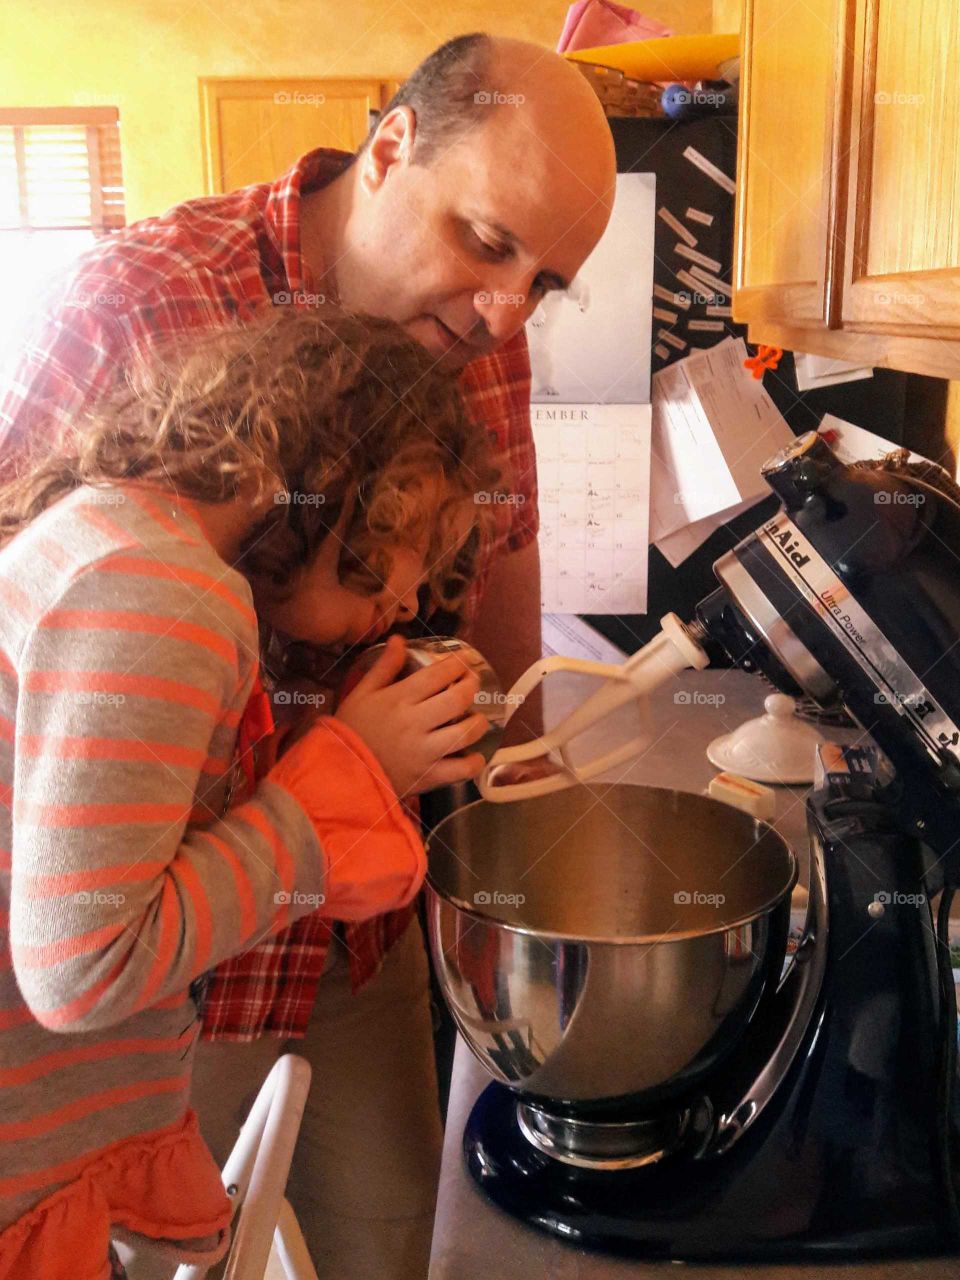 Baking with Dad